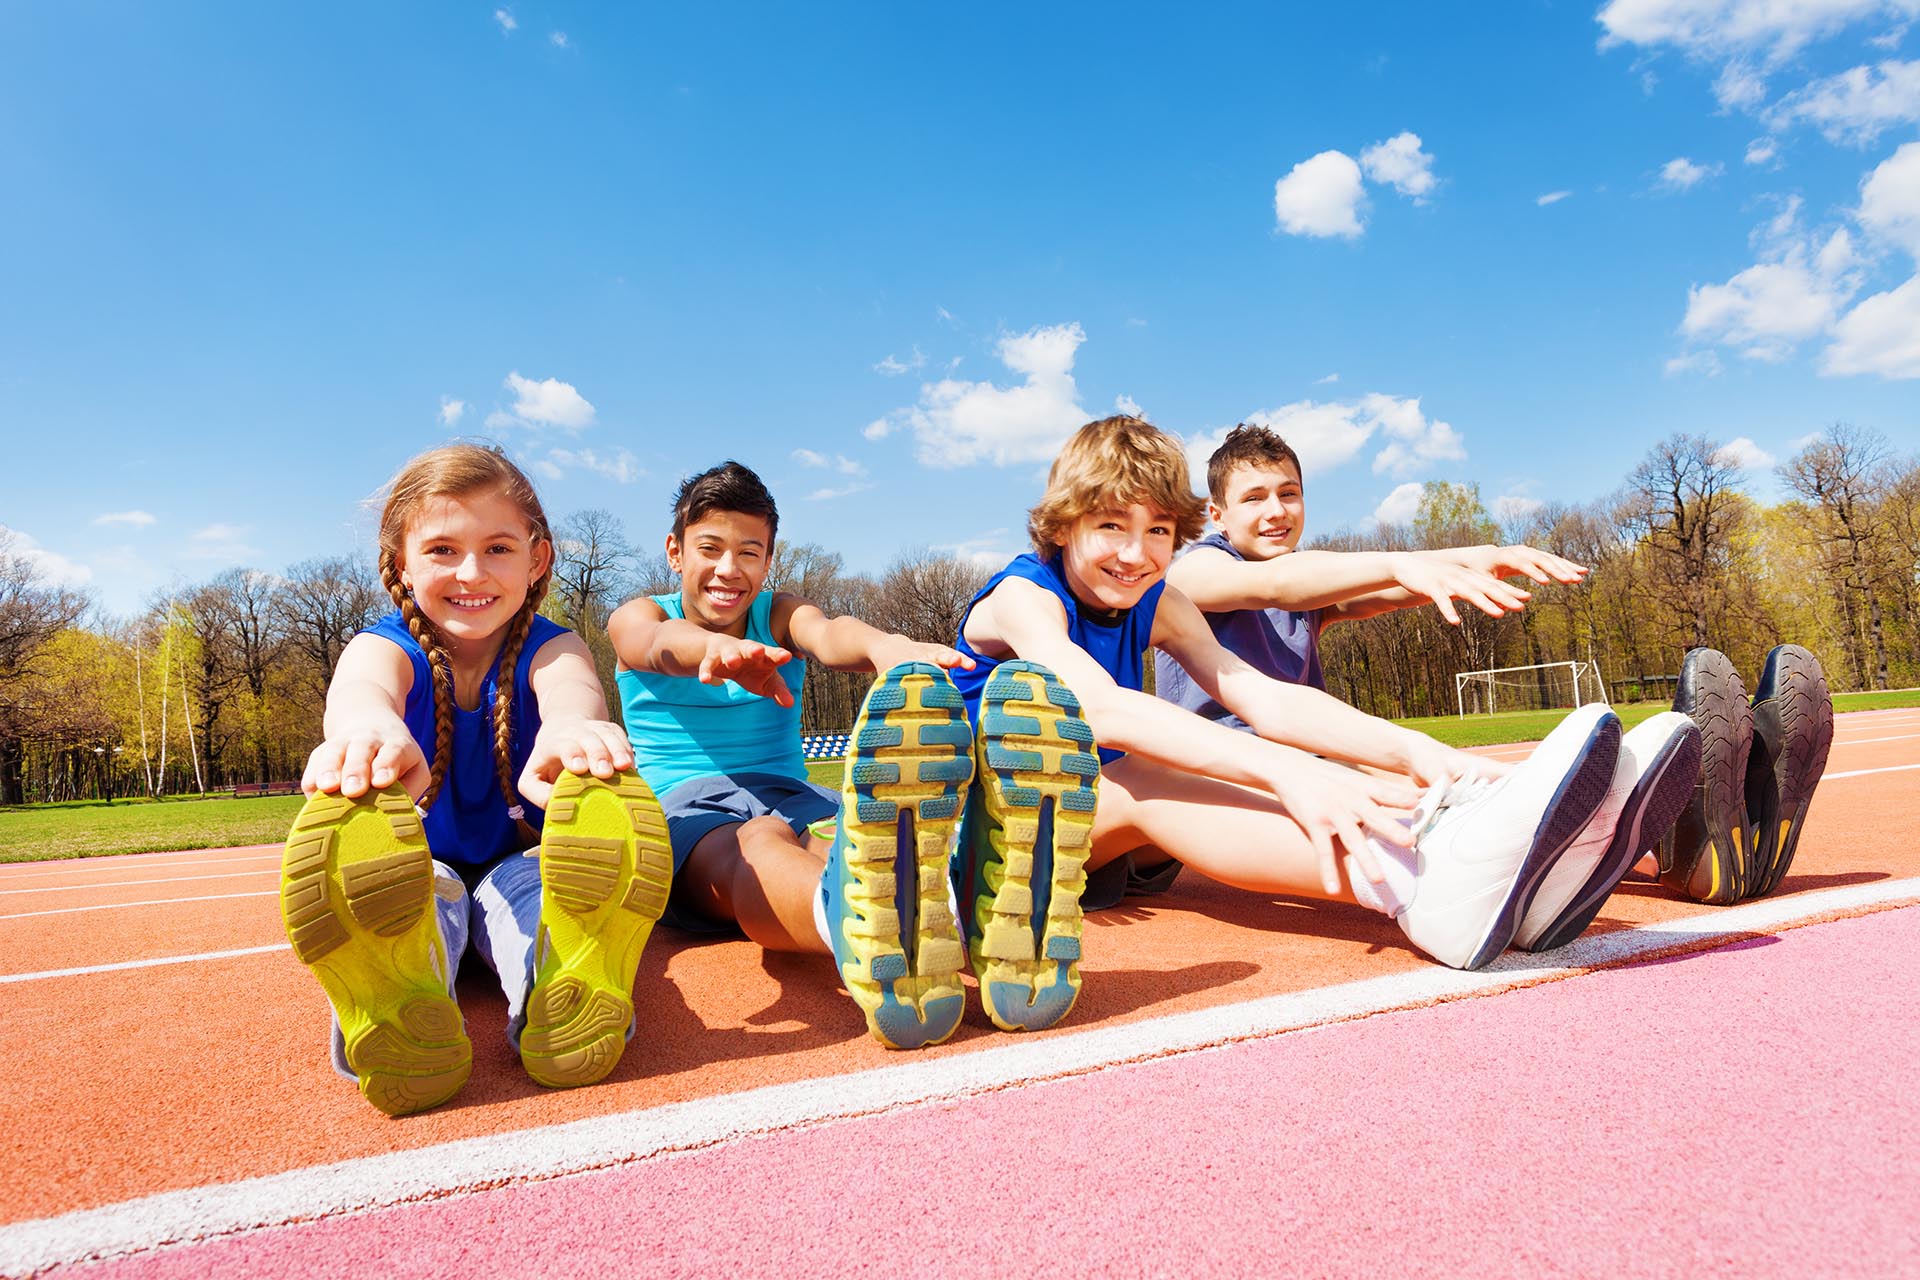 Physical activity recommendations for kids